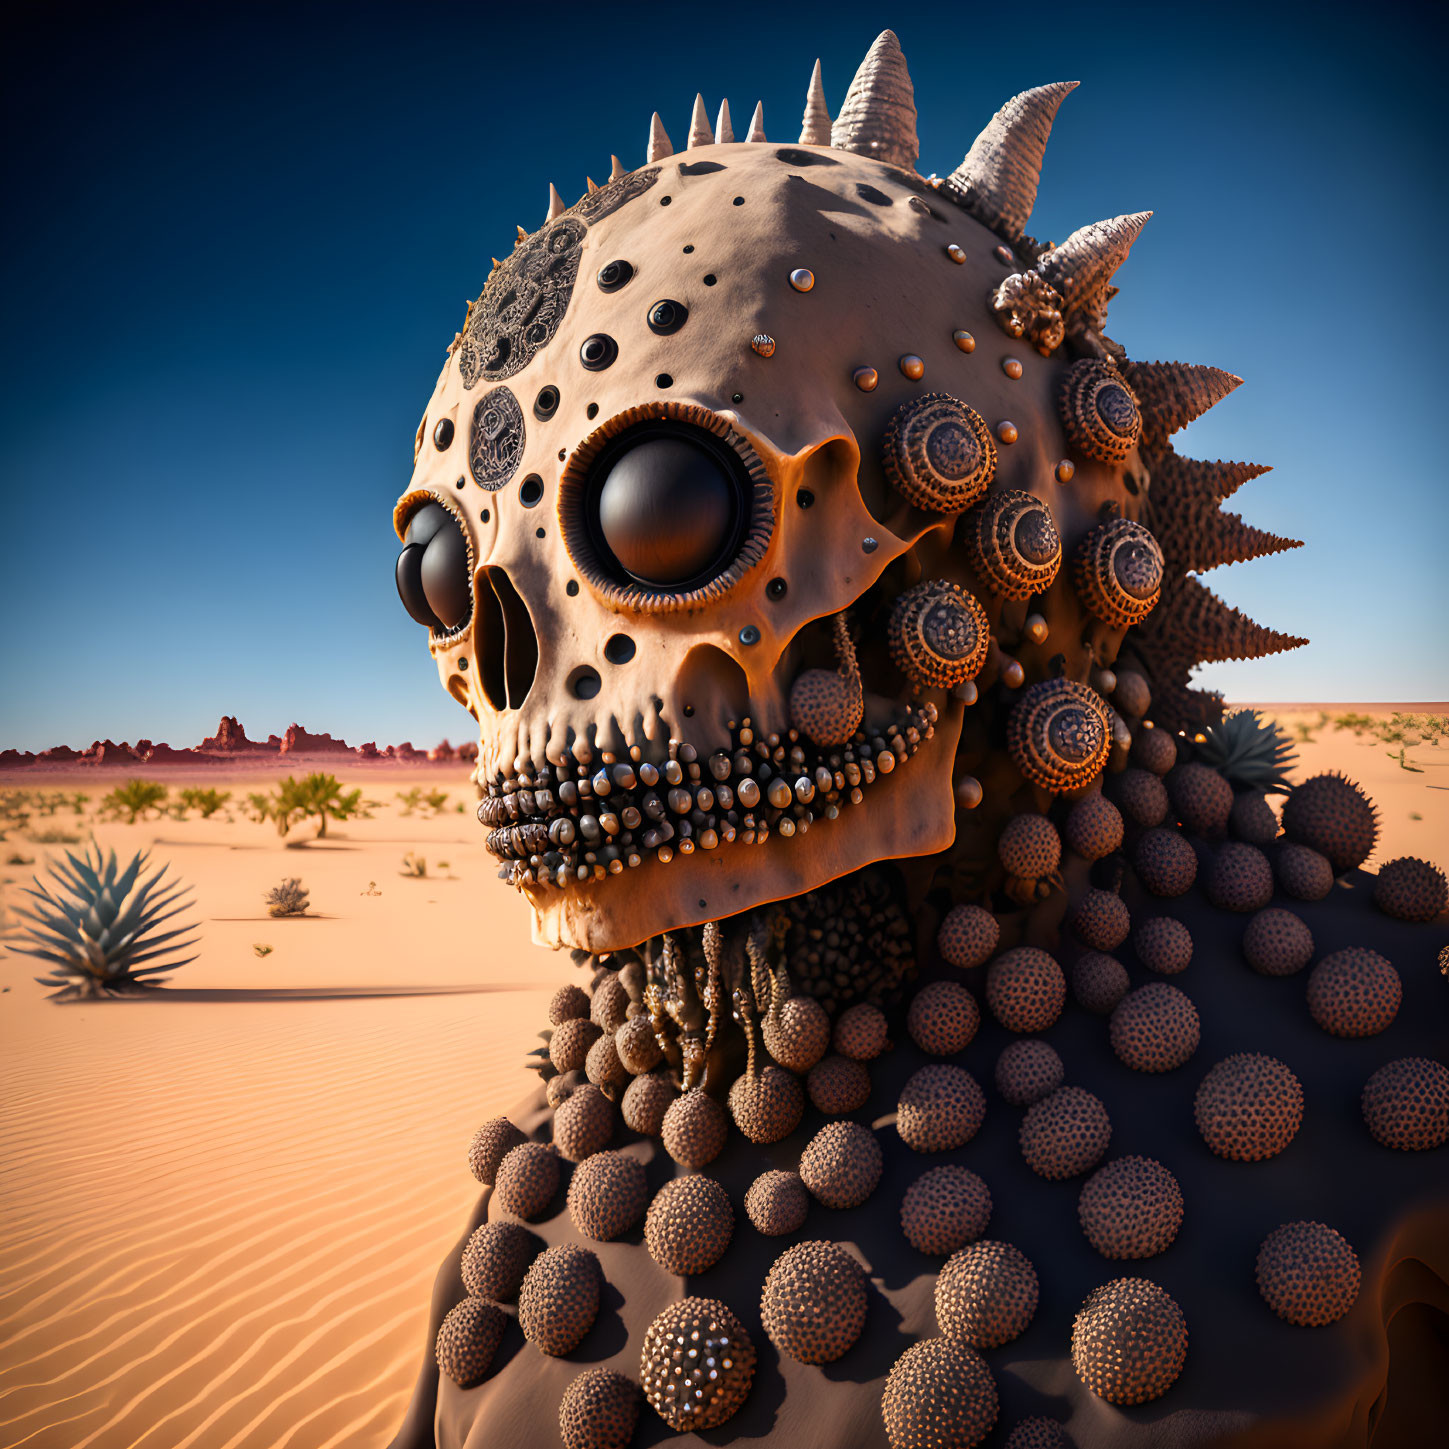 Metallic skull with gears and spikes in surreal desert setting